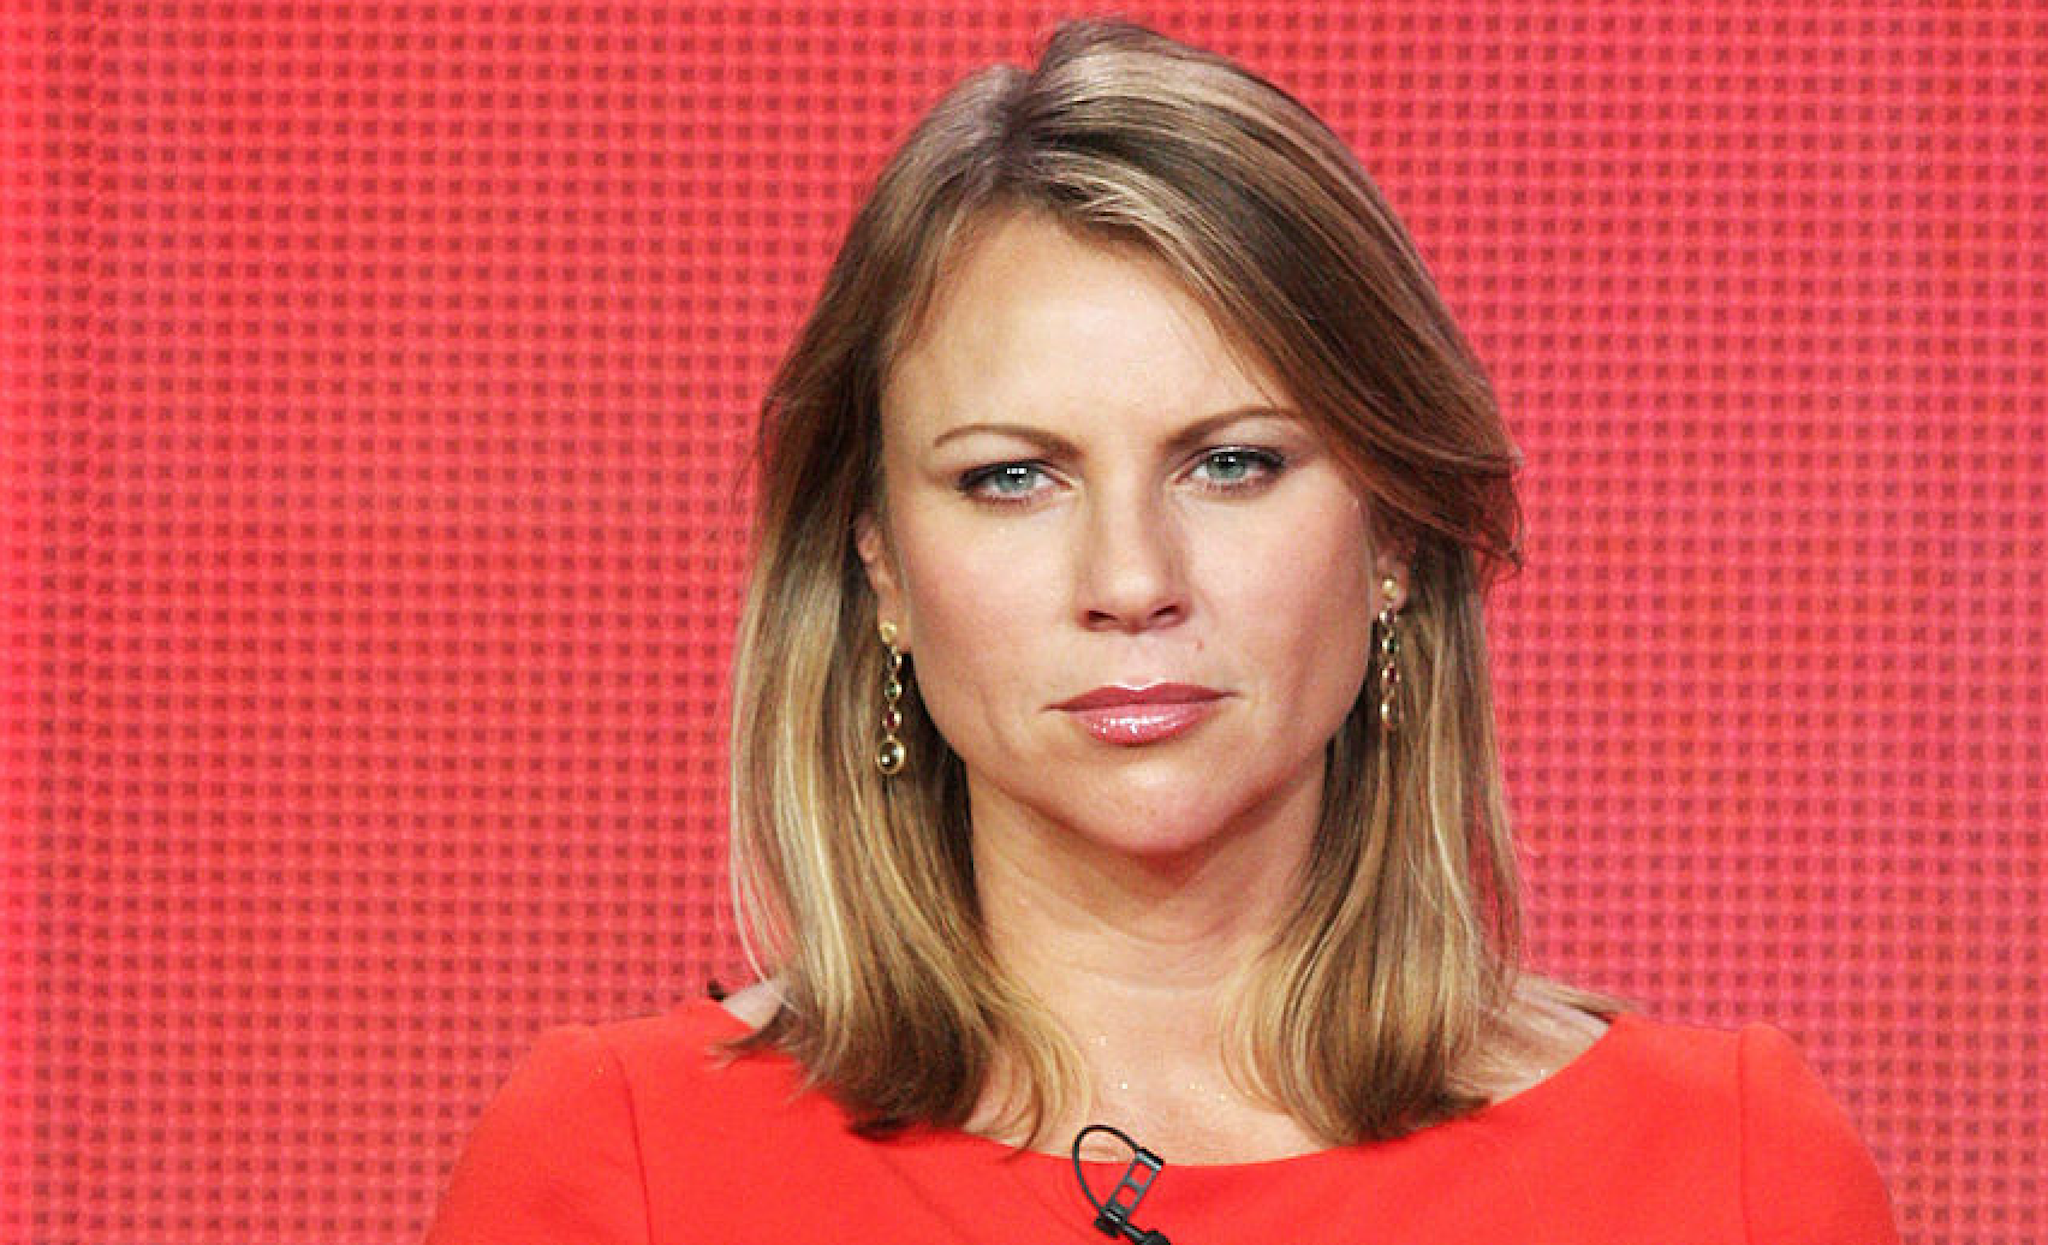 Correspondent Lara Logan of the TV show '60 Minutes Sports' attends the 2013 TCA Winter Press Tour CW/CBS panel held at The Langham Huntington Hotel and Spa on January 12, 2013 in Pasadena, California